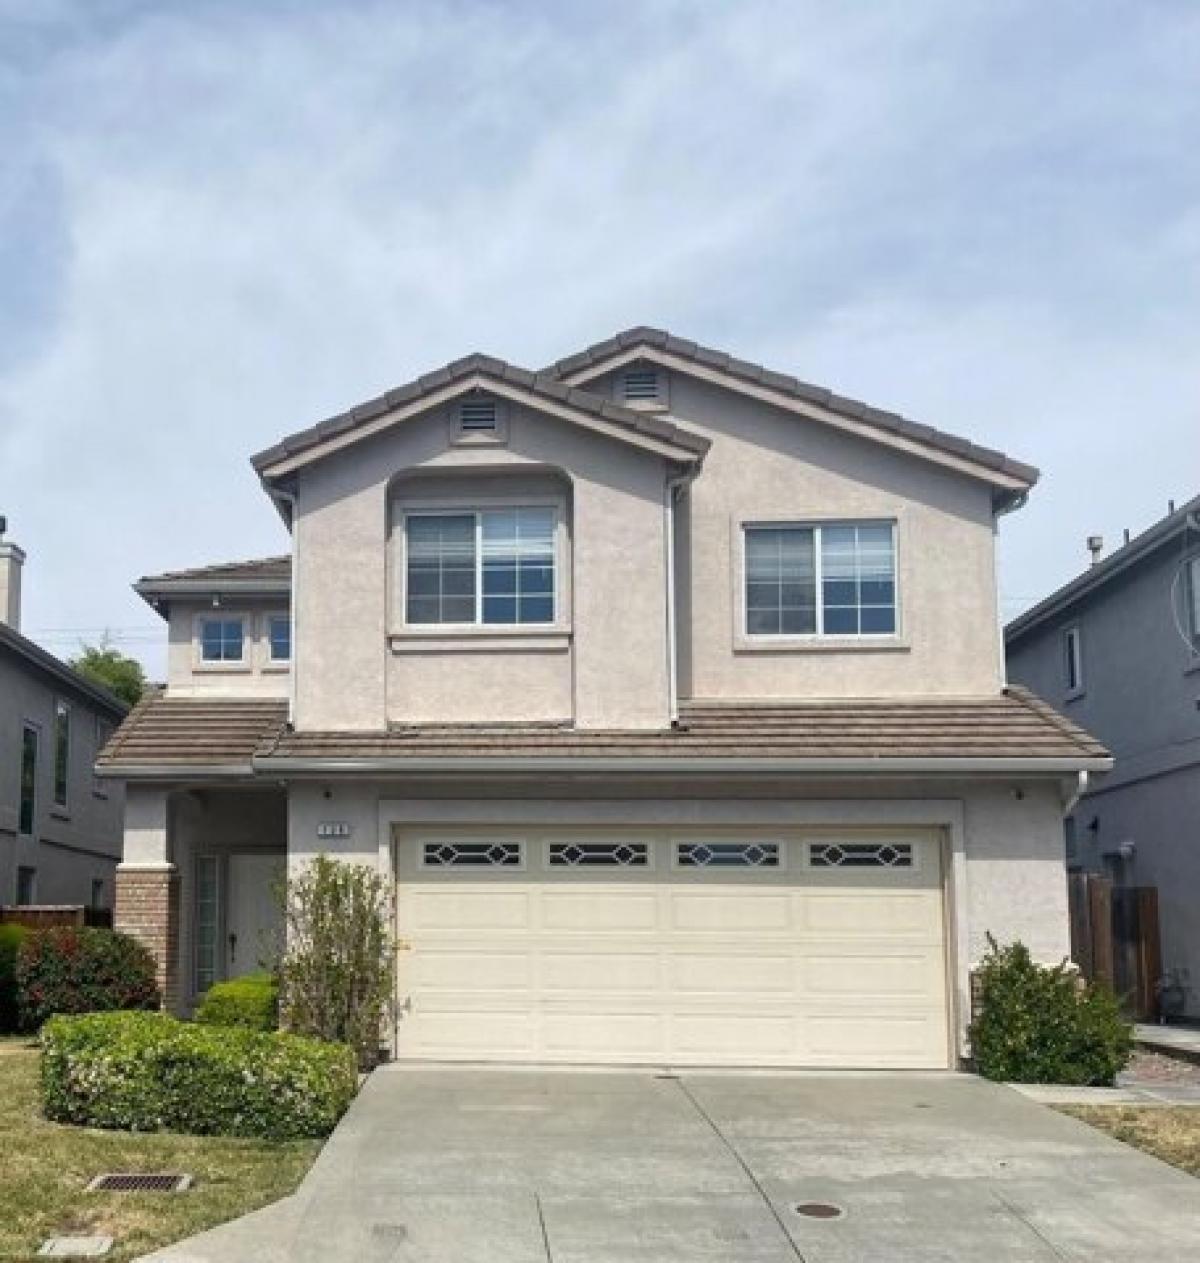 Picture of Home For Sale in Milpitas, California, United States